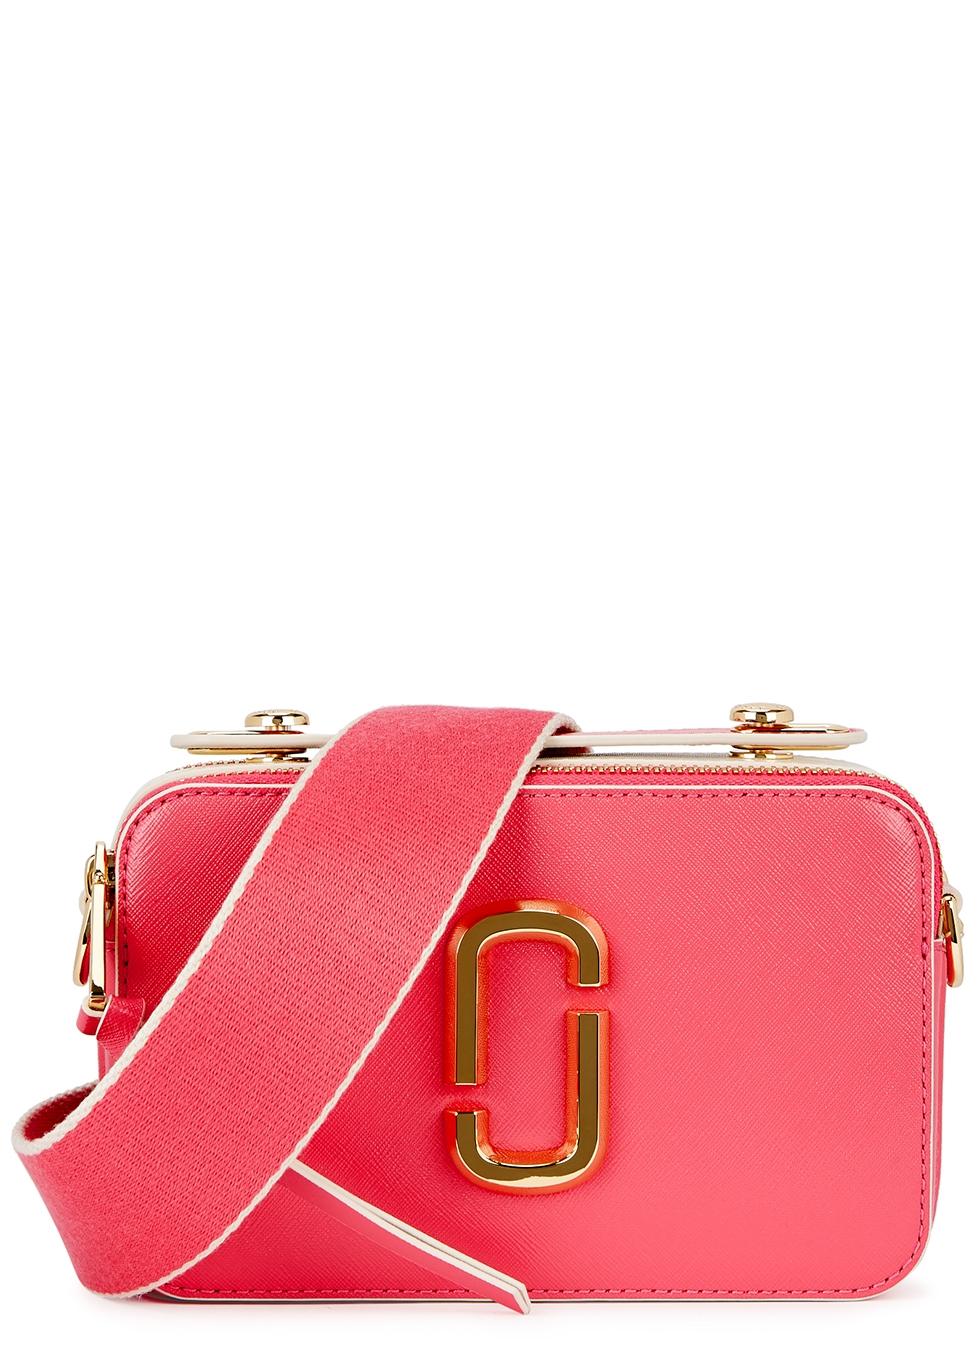 Marc Jacobs The Sure Shot Large Leather Cross-body Bag in Pink - Lyst